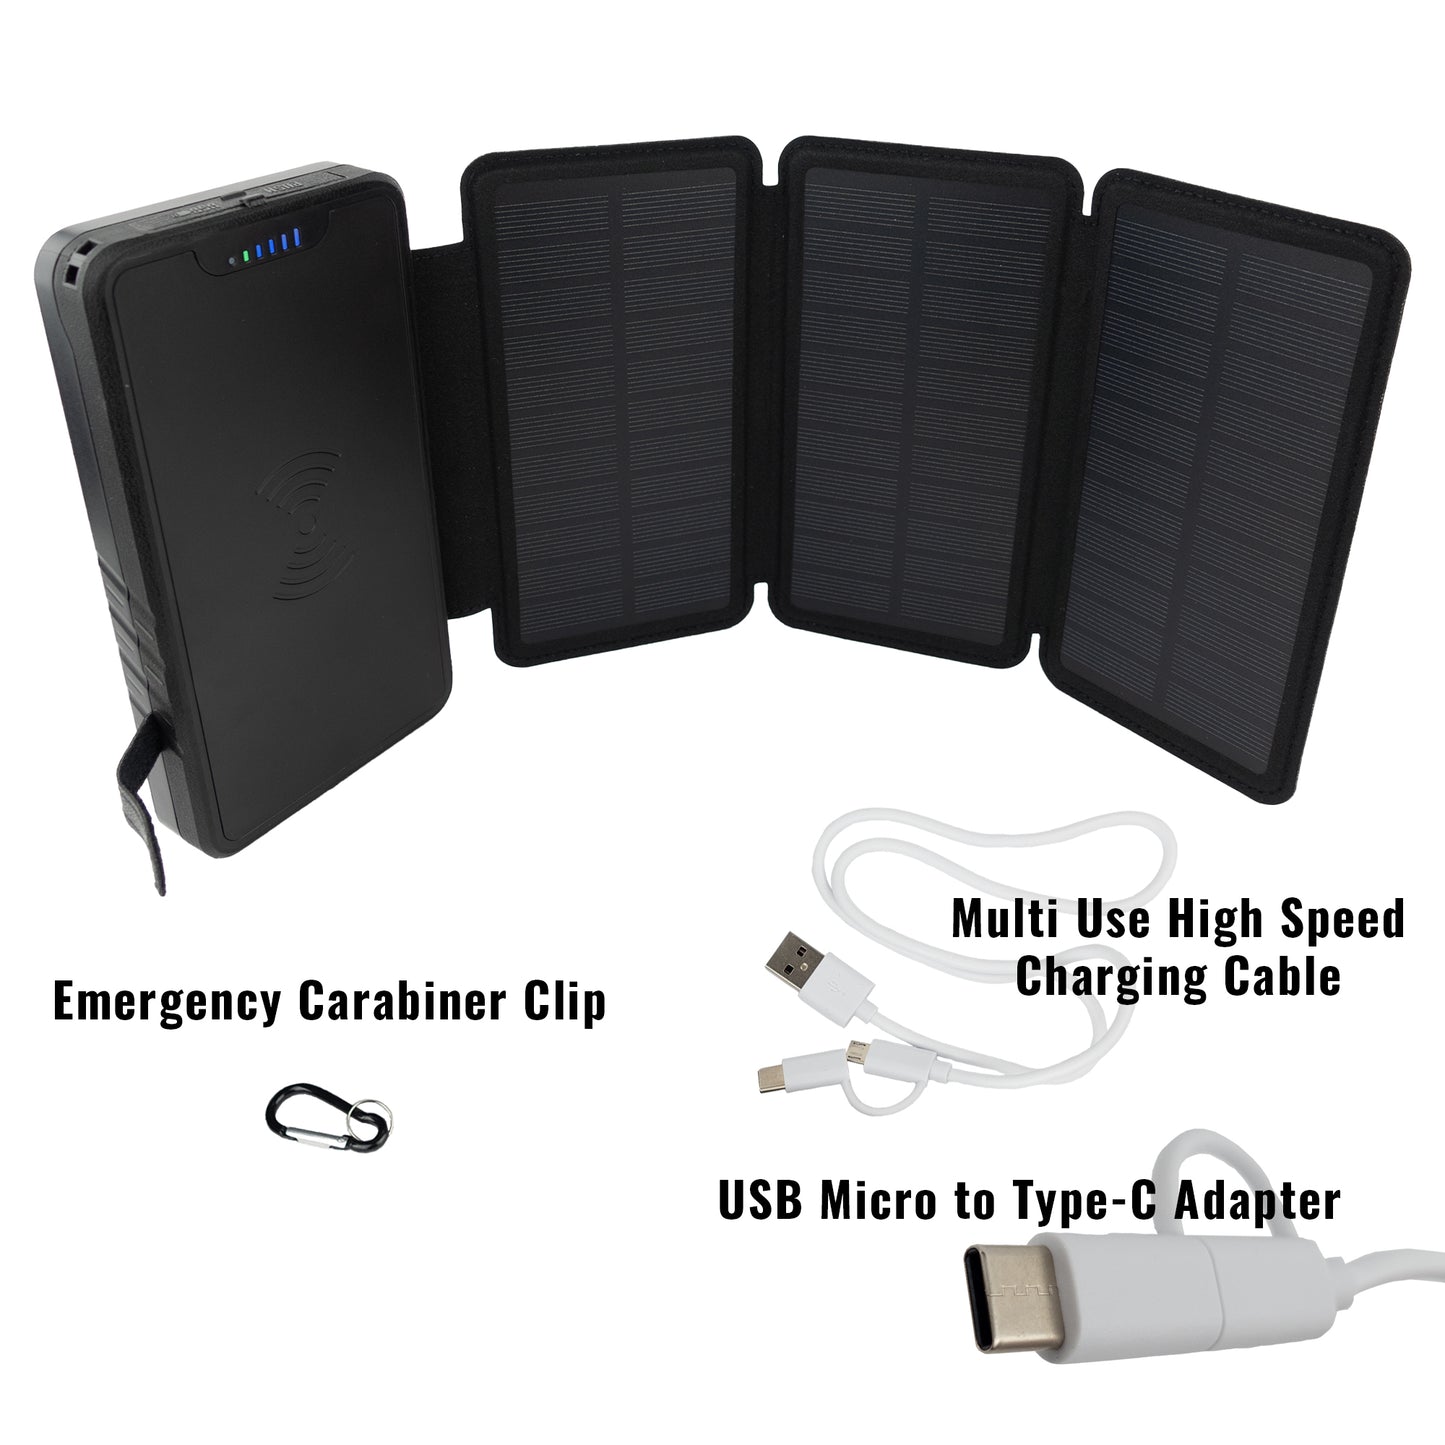 [ Bulk Pack of 10 ] Tough Light 820W 3 Panel USB Solar Power Bank Charger - 20,000mAh Li Polymer with WIRELESS Phone Charging - 2AMP High Speed Cable Included